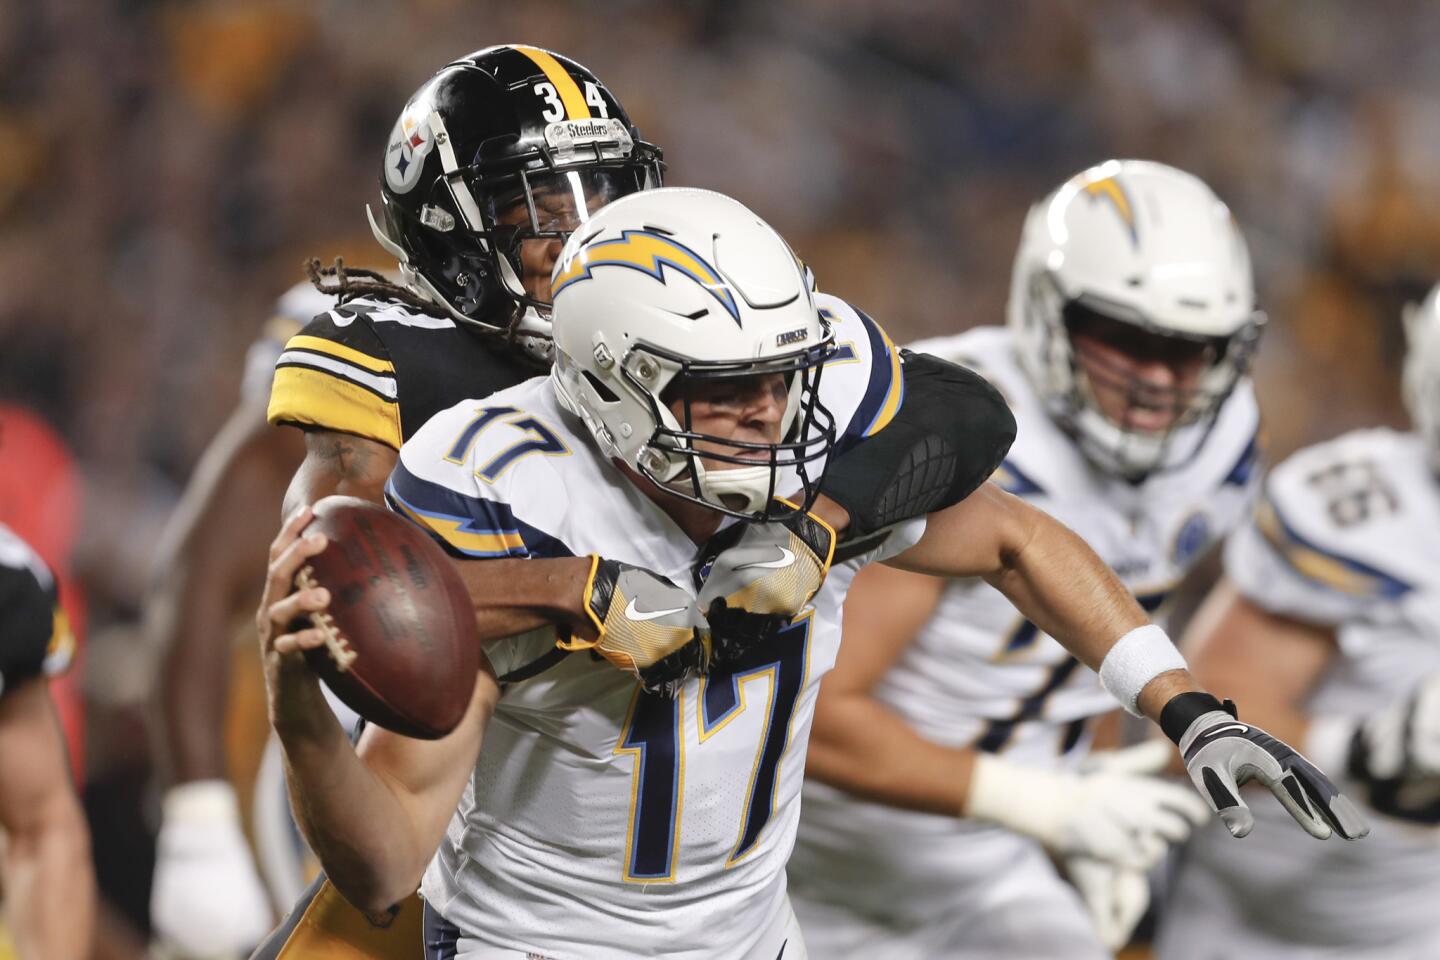 Pittsburgh Steelers strong safety Terrell Edmunds (34), left, sacks Los Angeles Chargers quarterback Philip Rivers (17) in the first half of an NFL football game, Sunday, Dec. 2, 2018, in Pittsburgh.